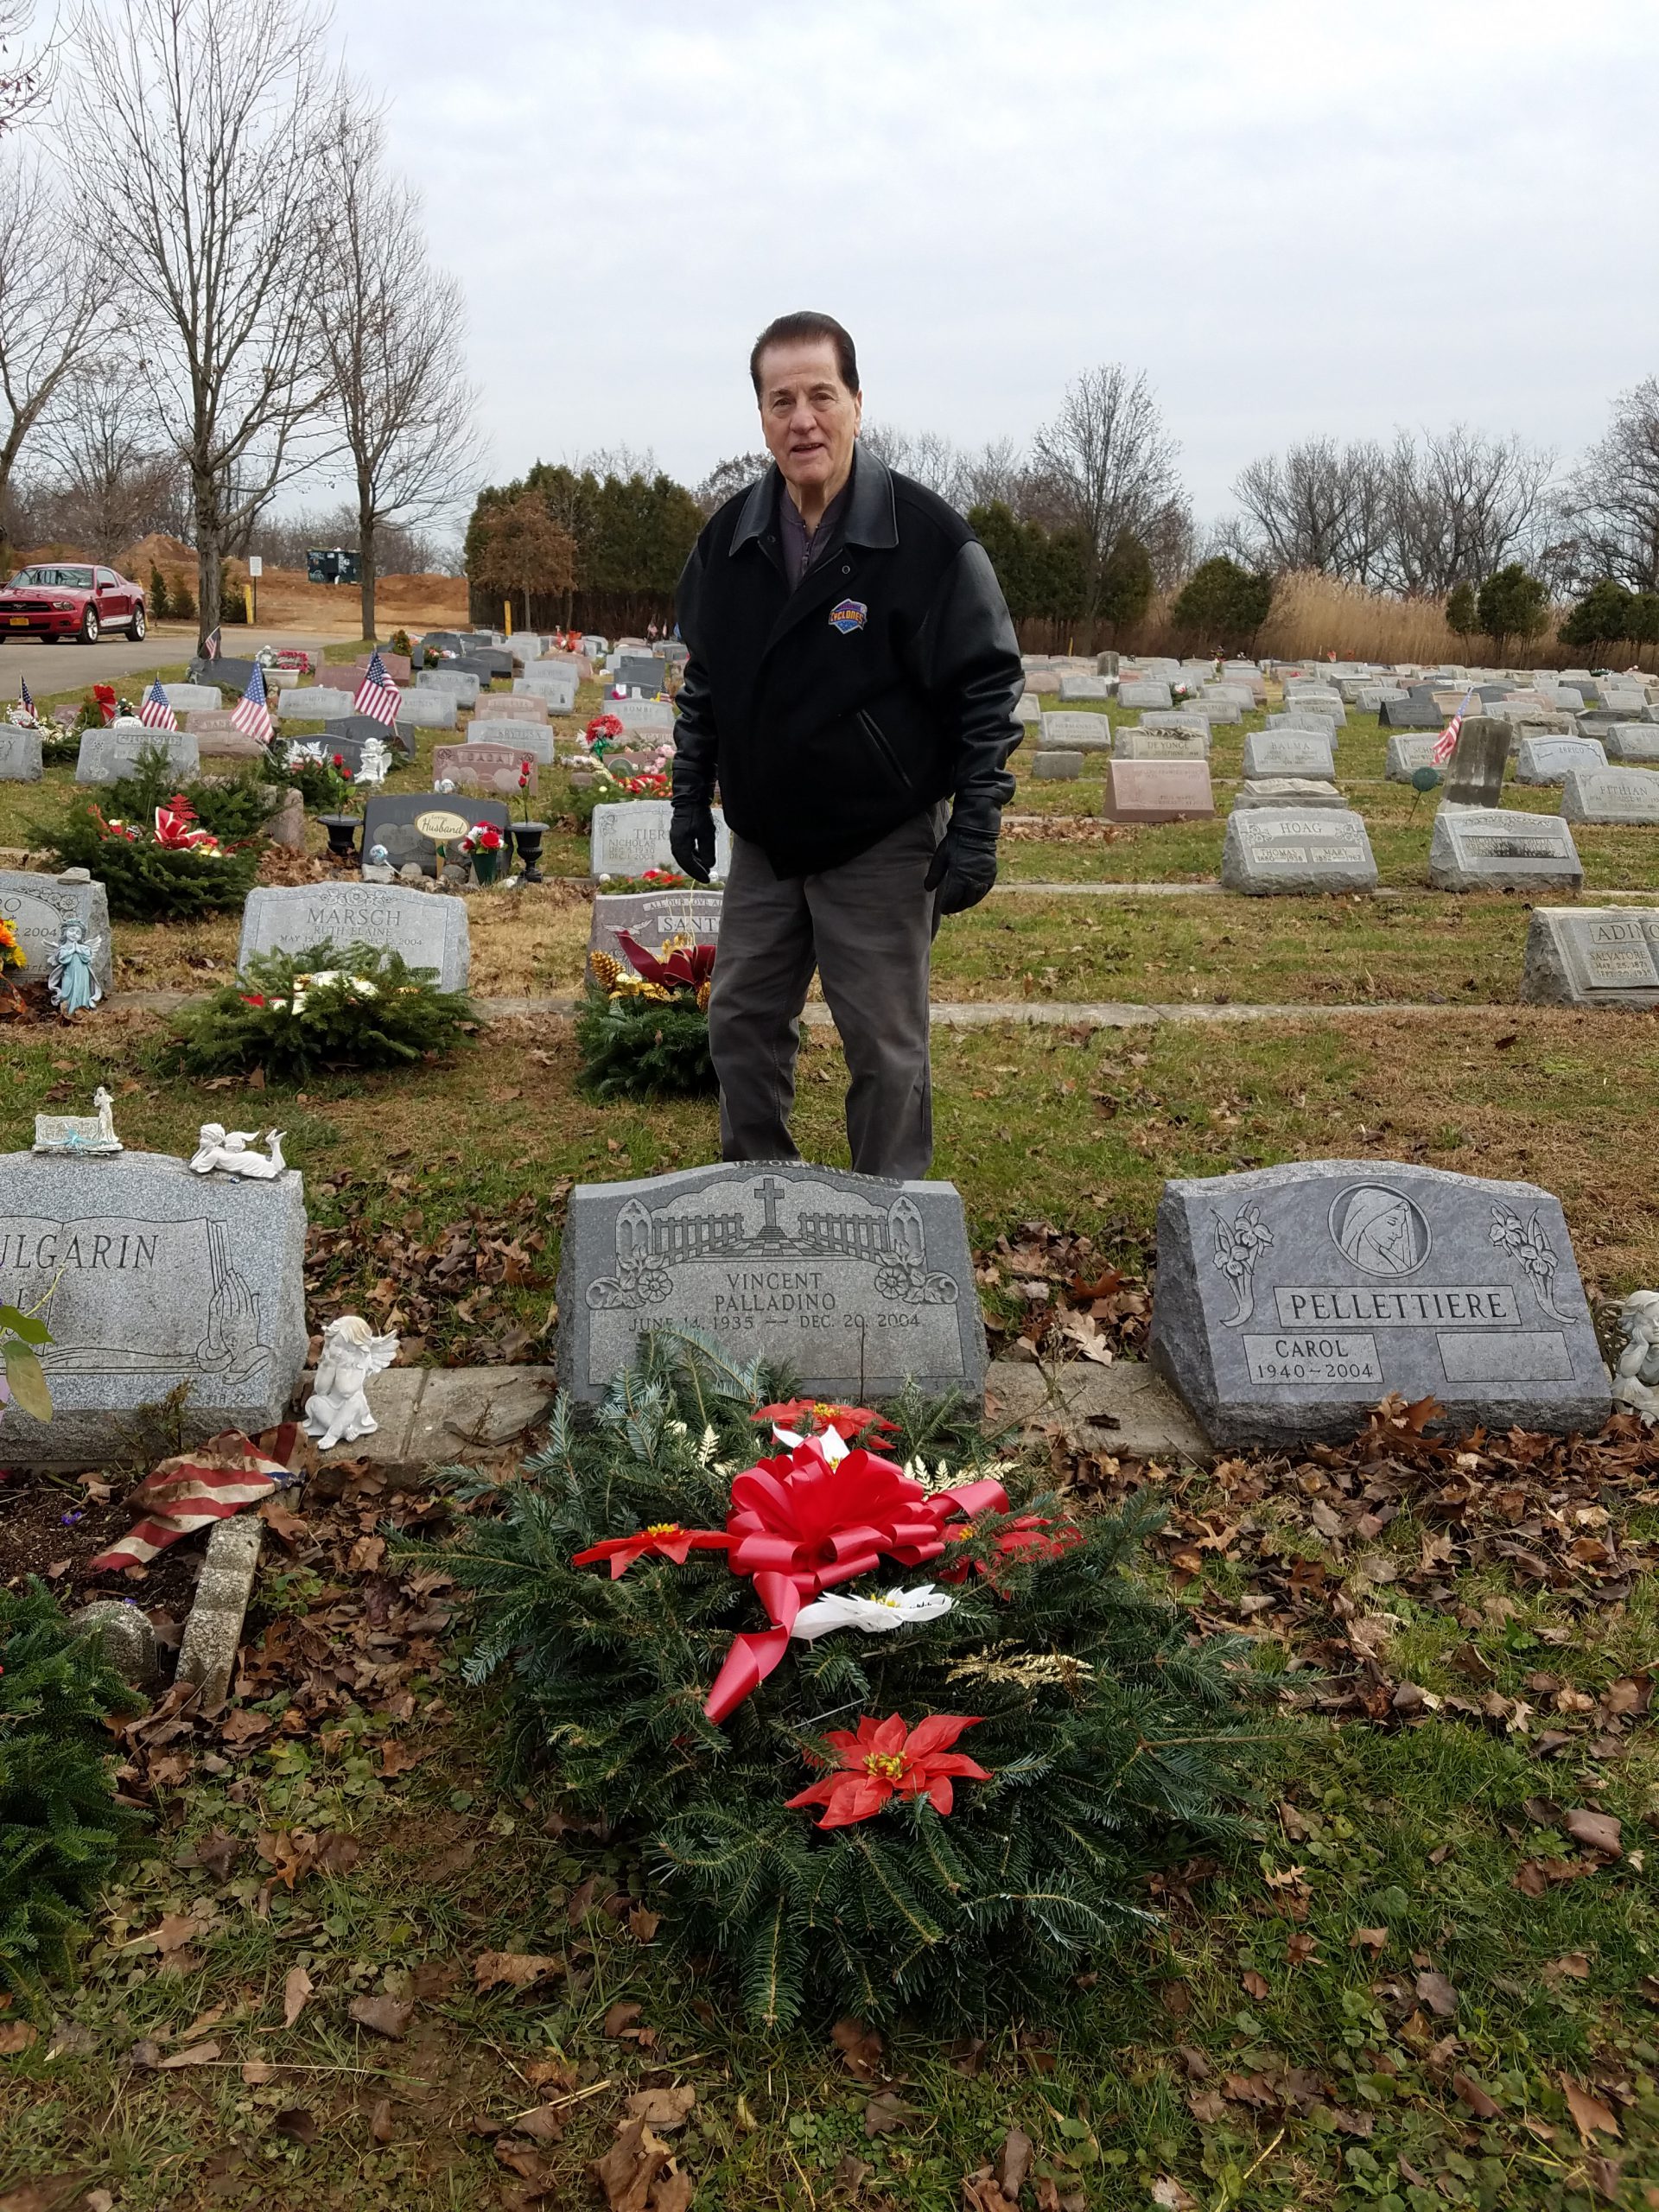 Tommy Roma Making Annual Christmas Visit to President Vince Palladino’s Grave Site